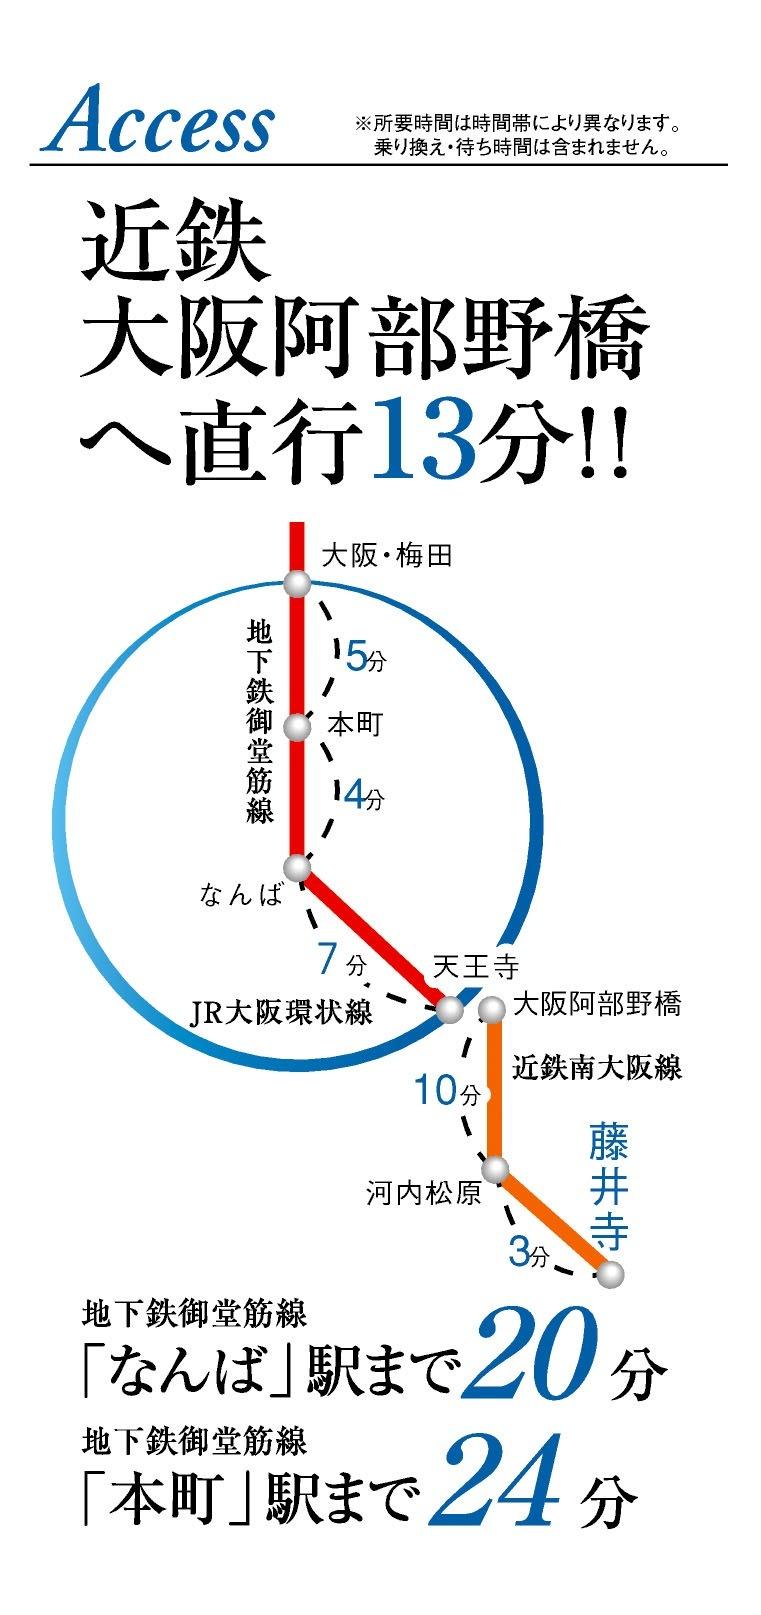 route map. You can go in 13 minutes nonstop to Osaka Abenobashi! !